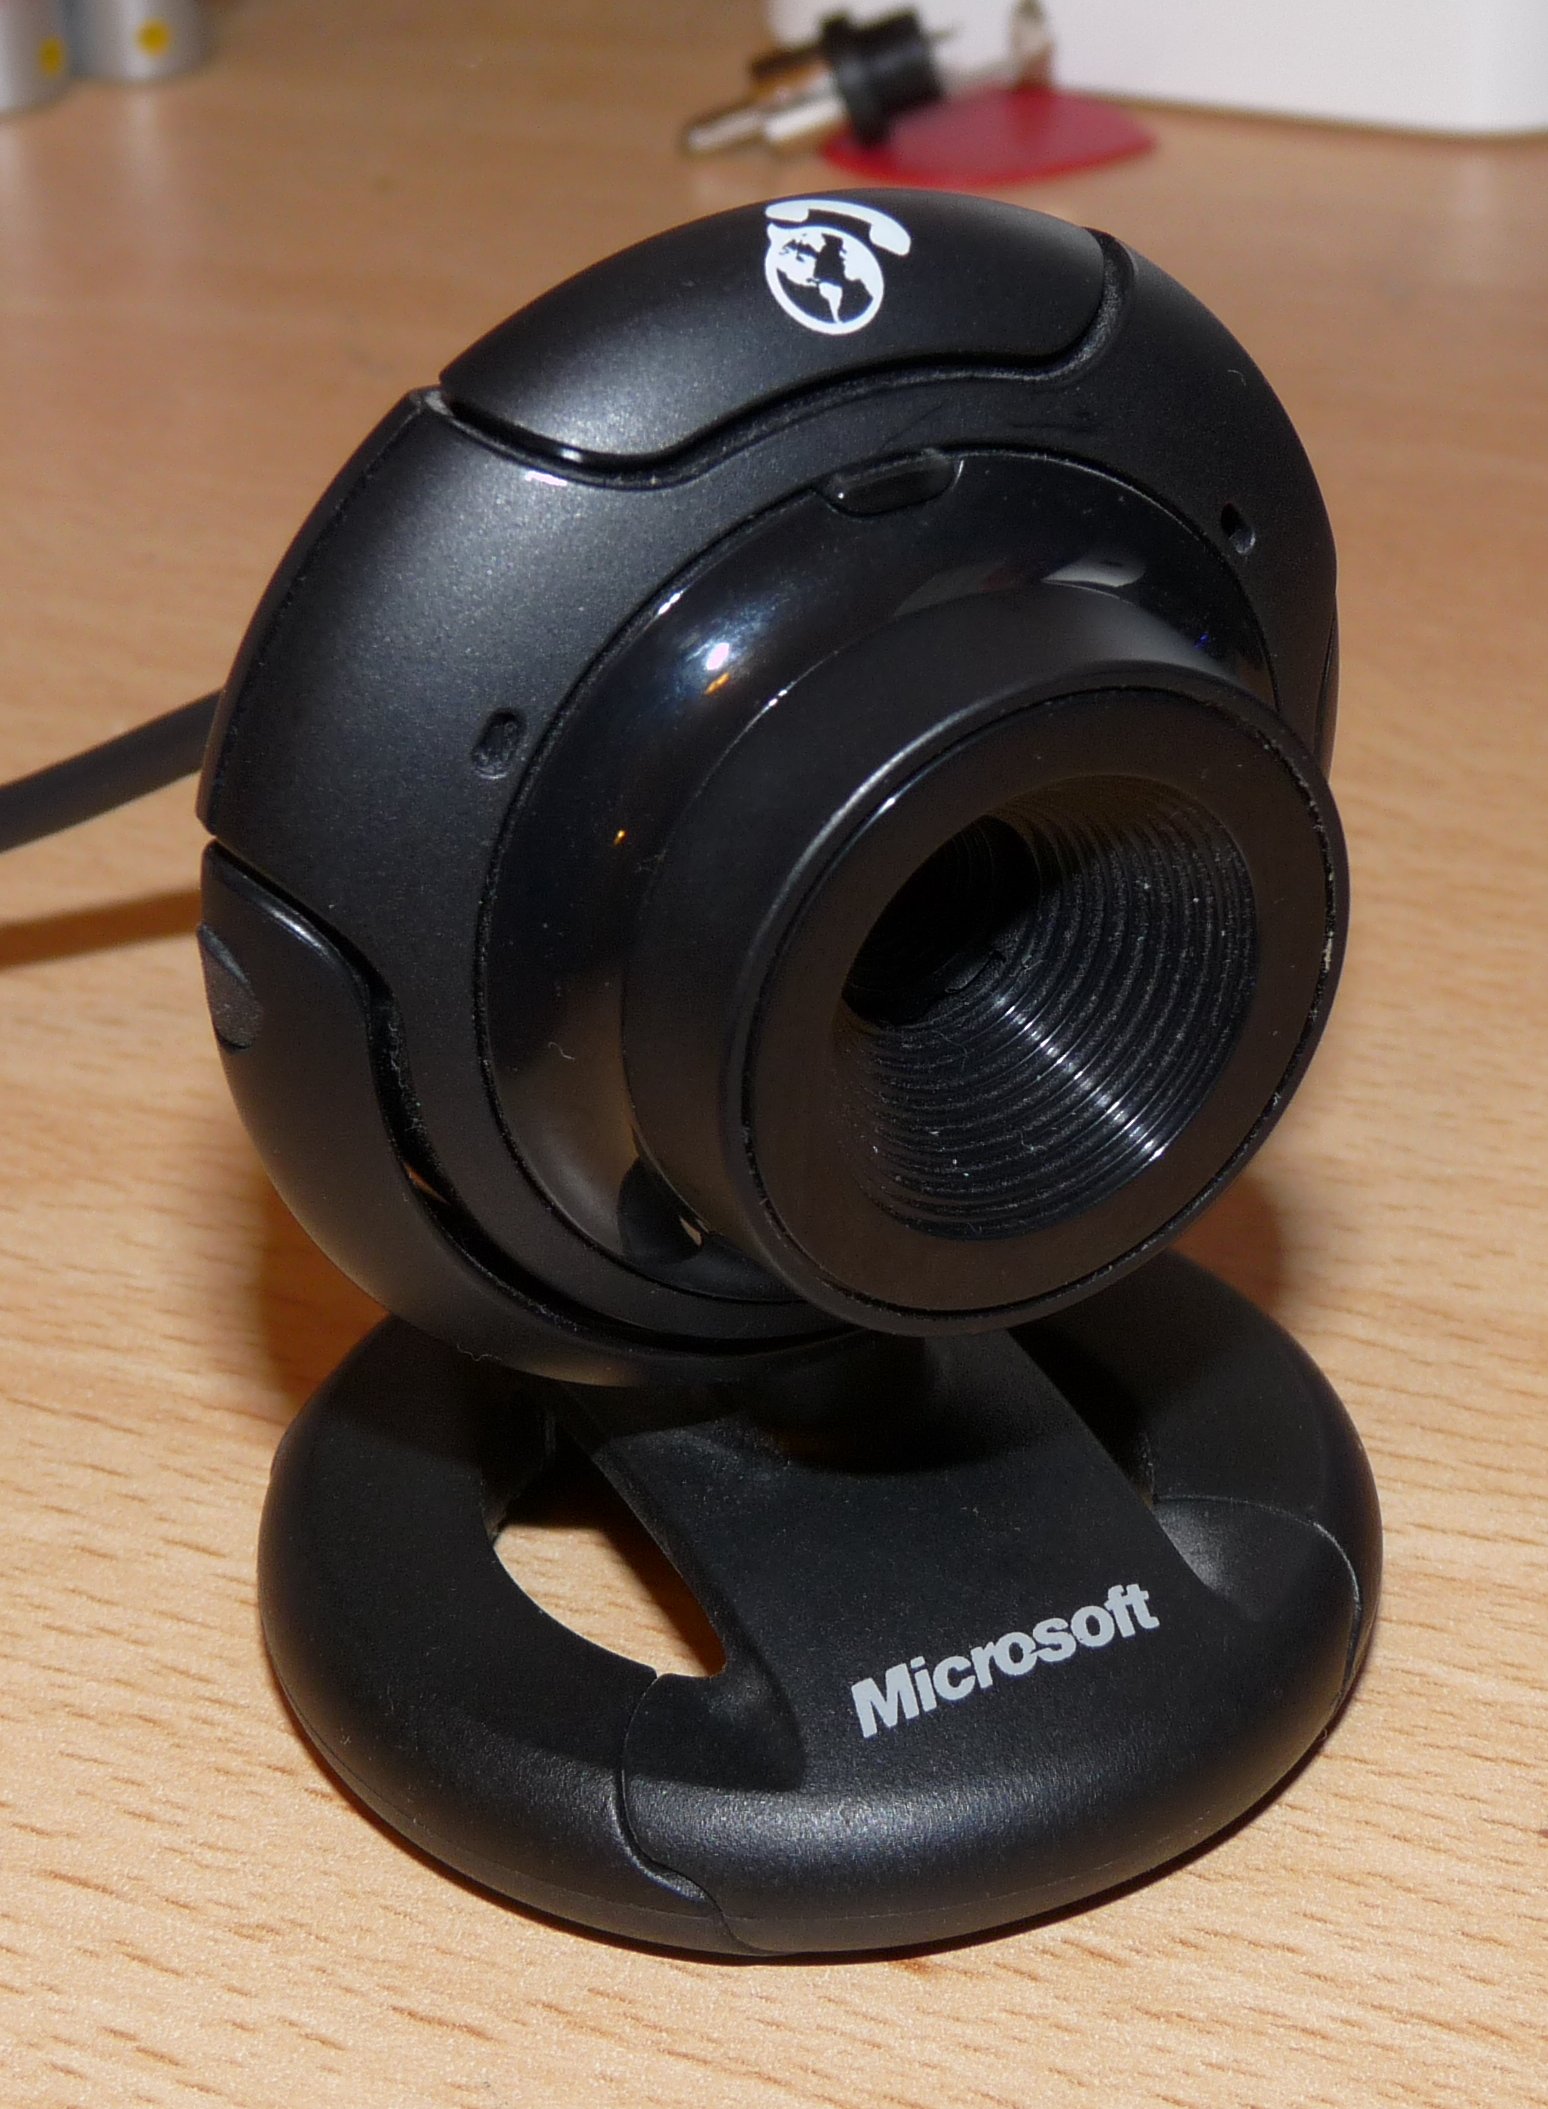 how to install driver for undetected webcam windows 10